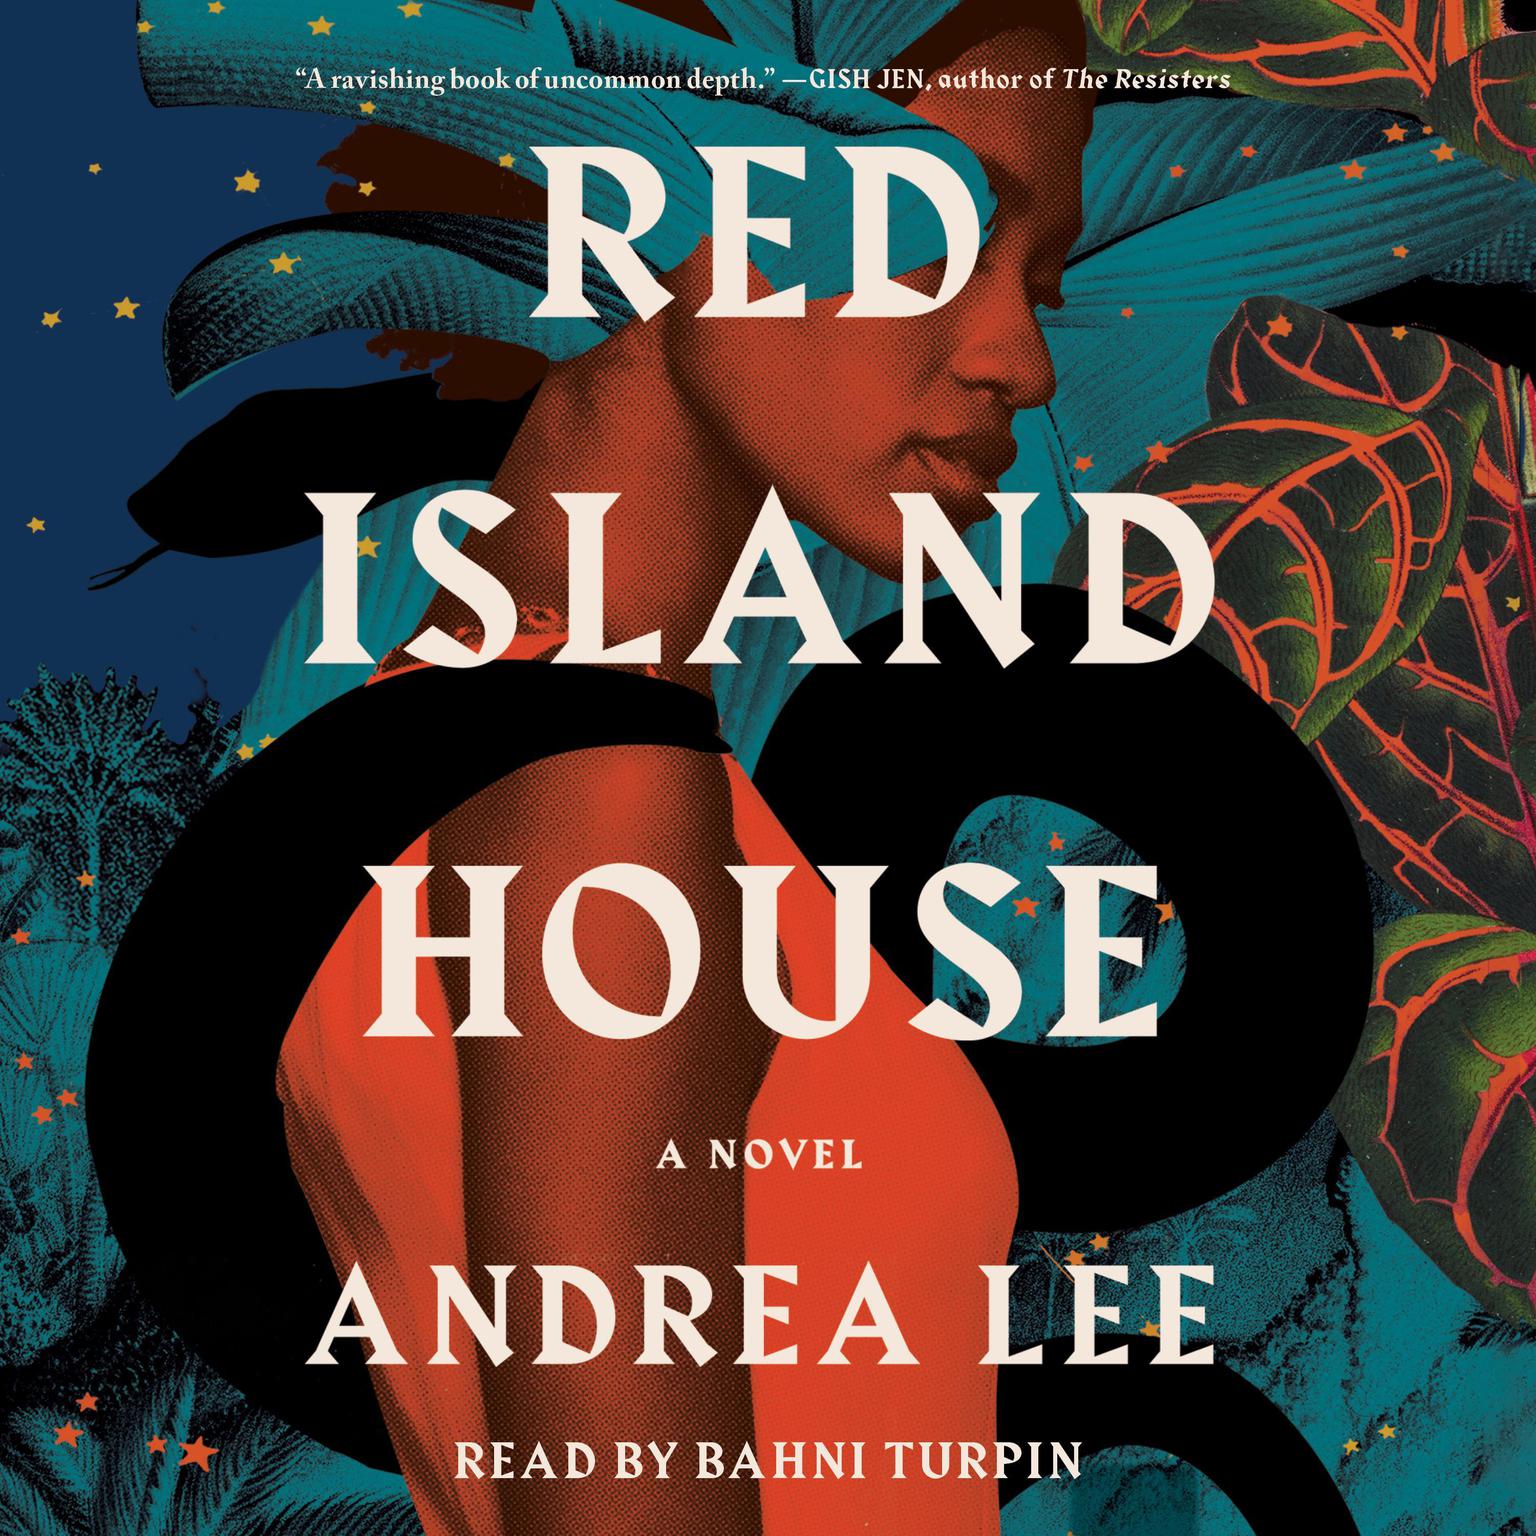 Red Island House: A Novel Audiobook, by Andrea Lee